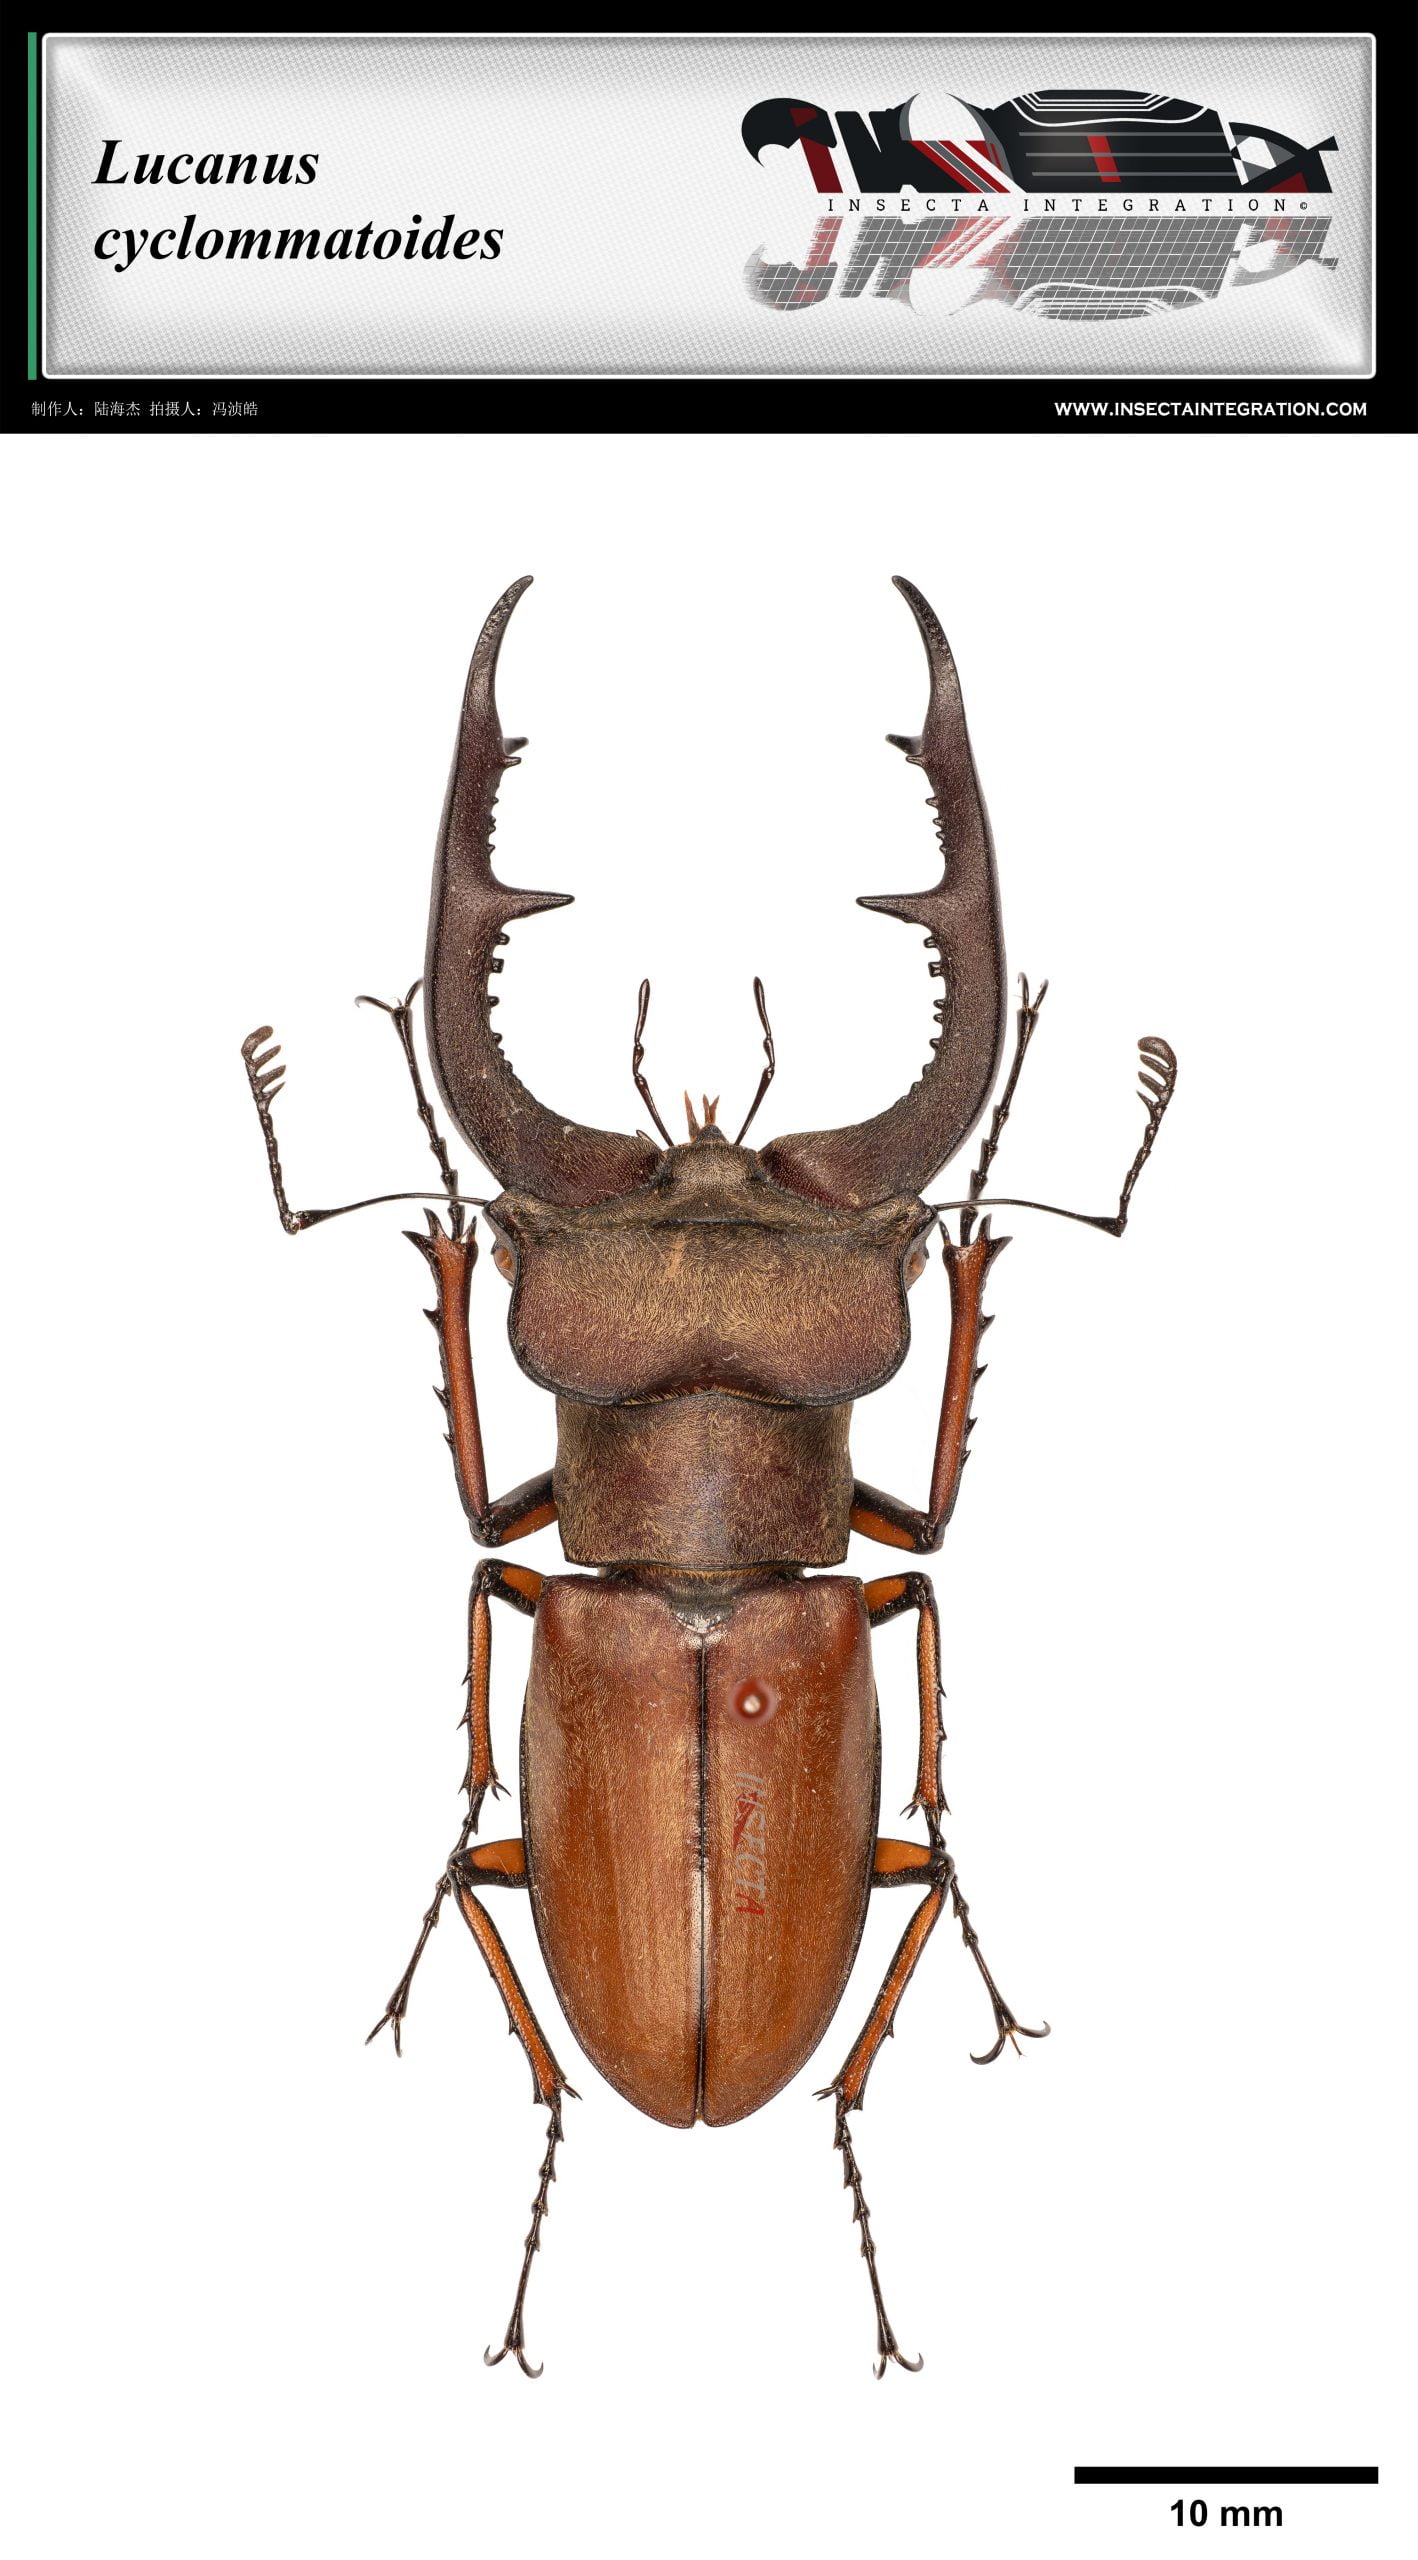 Read more about the article 橙深山锹甲 Lucanus cyclommatoides